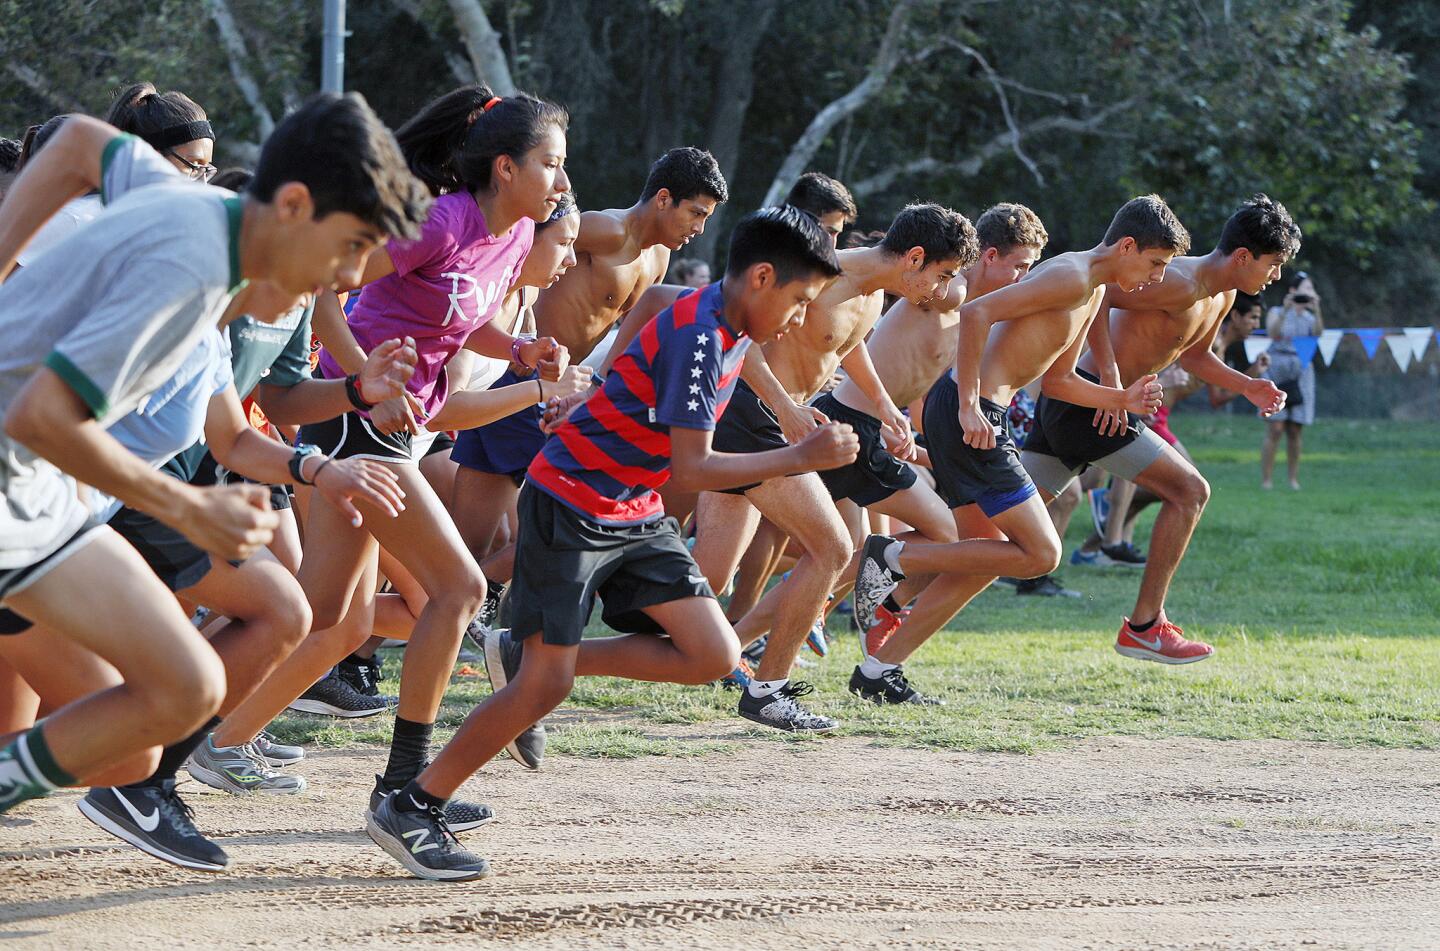 The start of the 5k race at a cross country meet at Crescenta Valley Regional Park in La Crescenta on Wednesday, August 8, 2018. The participants were primarily high school students but members of the community also ran.